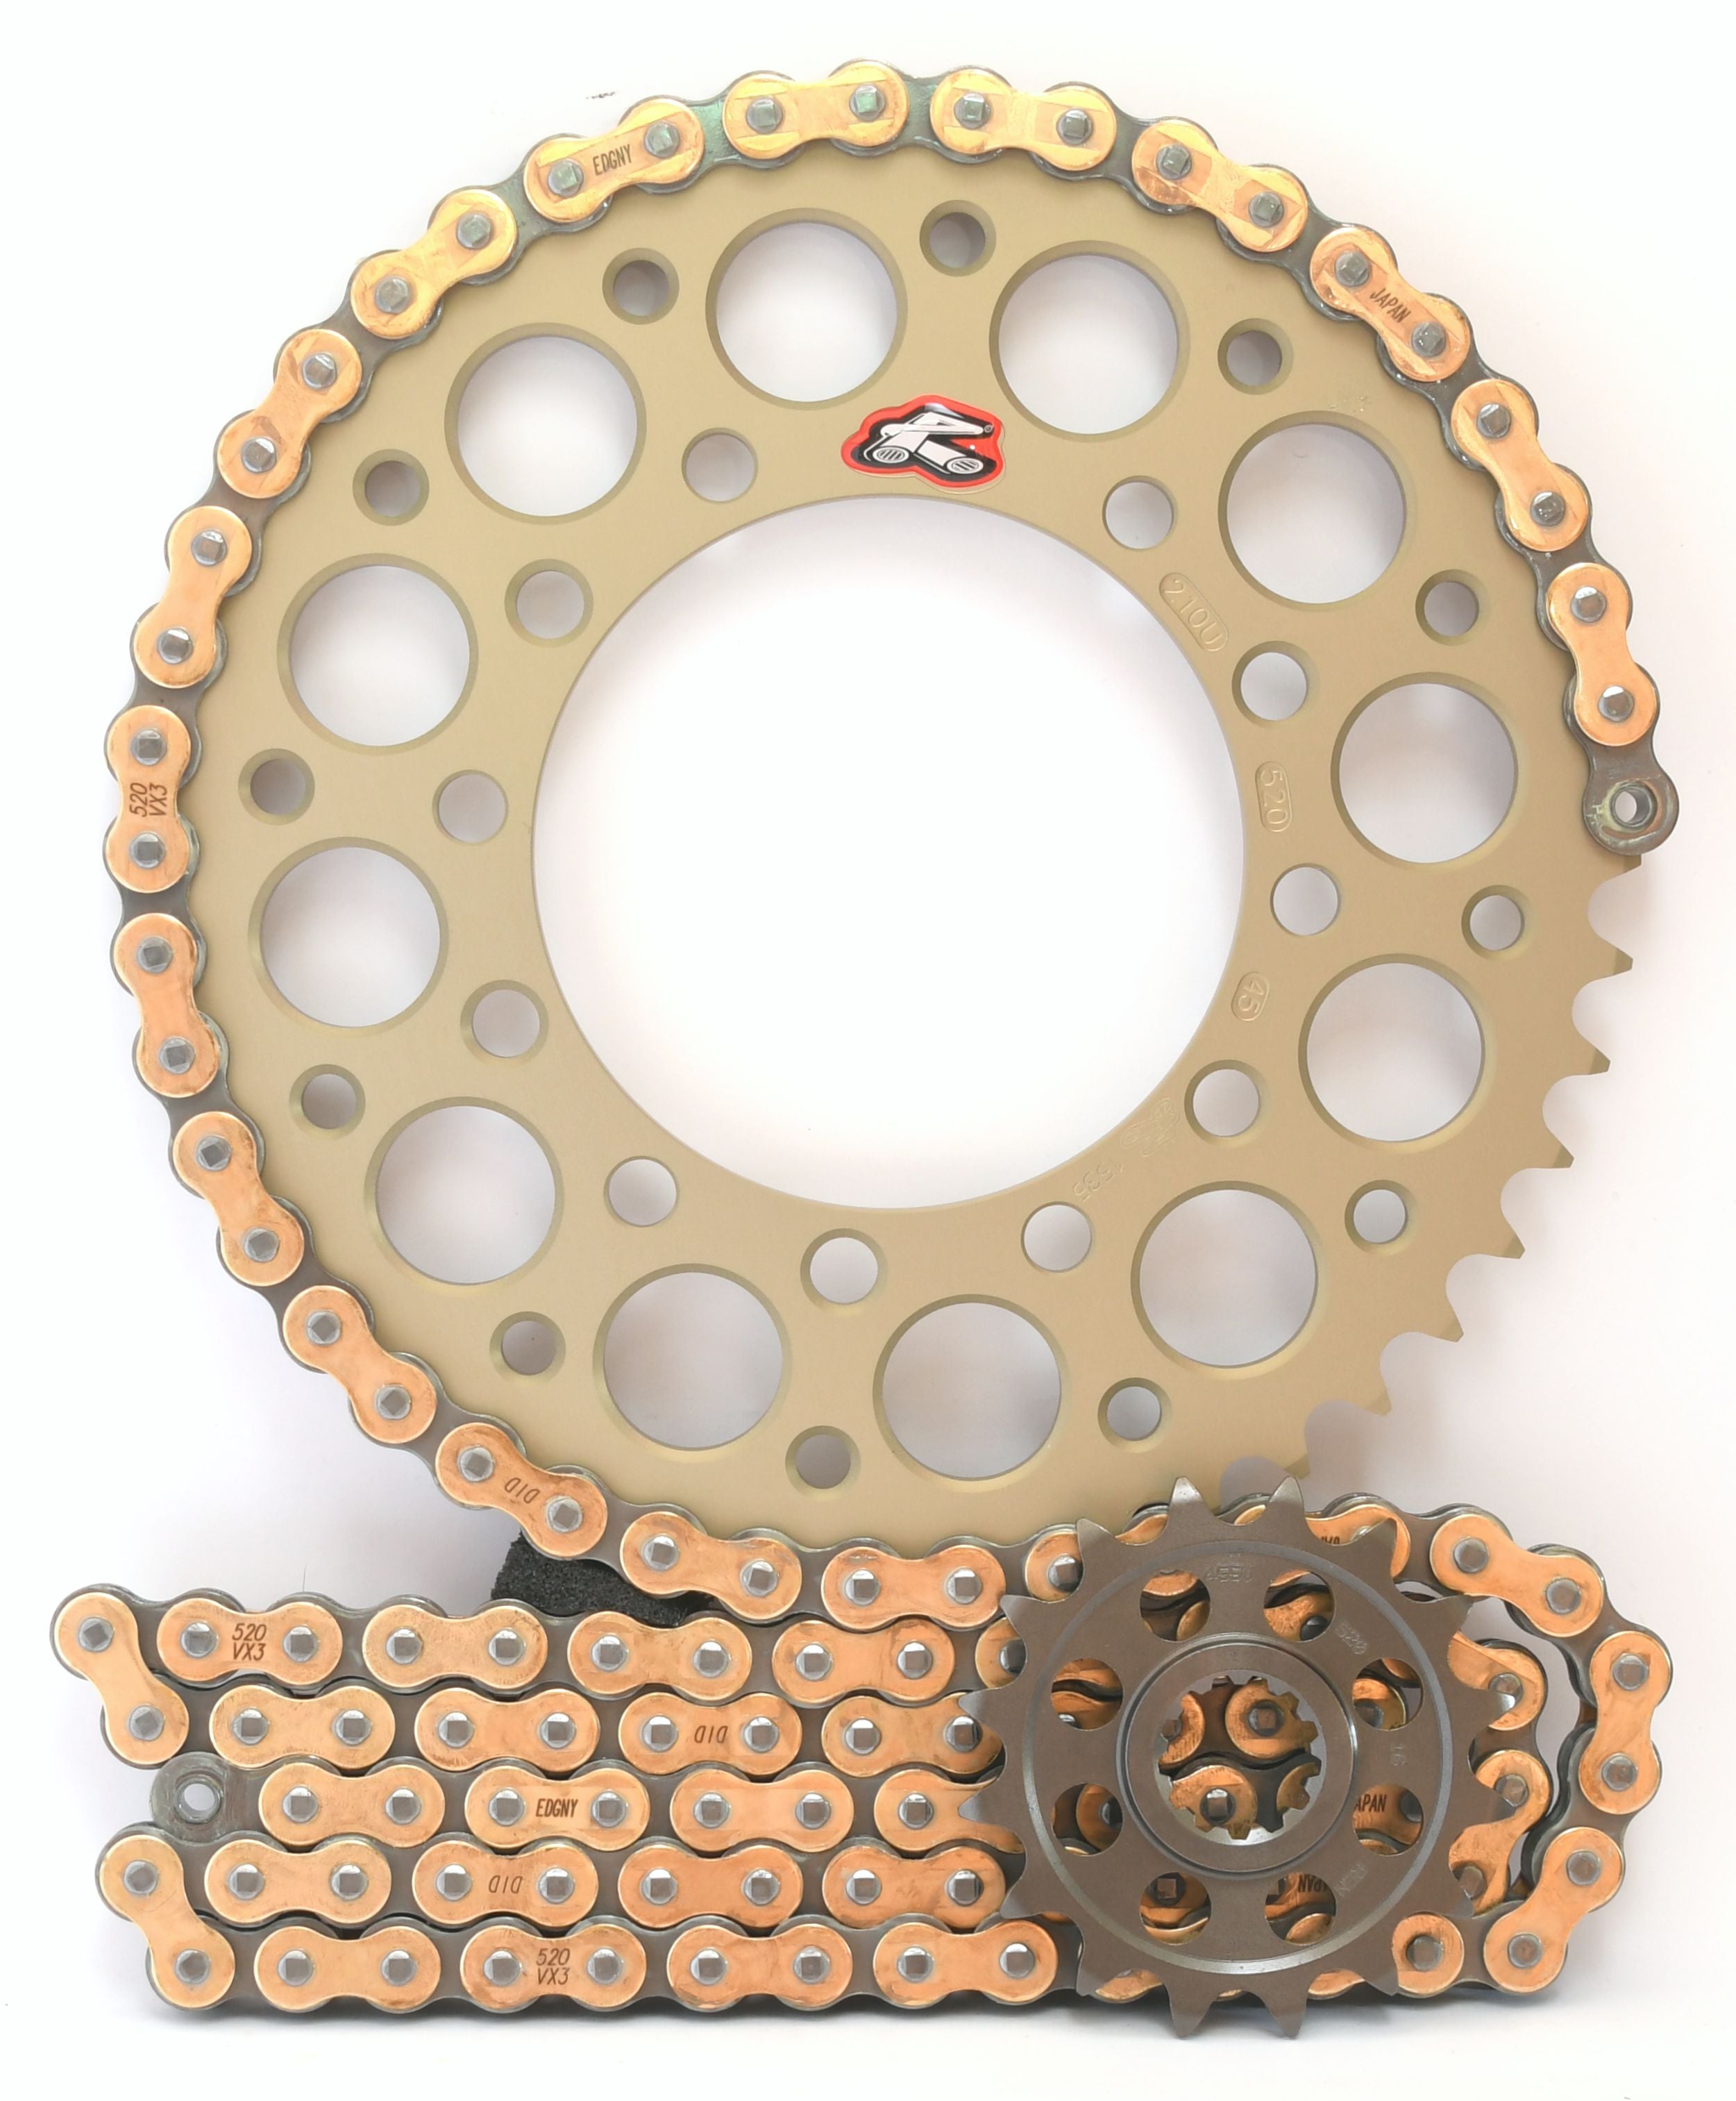 Renthal Ultralight and DID 520 Conversion Chain & Sprocket Kit for BMW S1000RR 2009-2018 - Choose Your Gearing